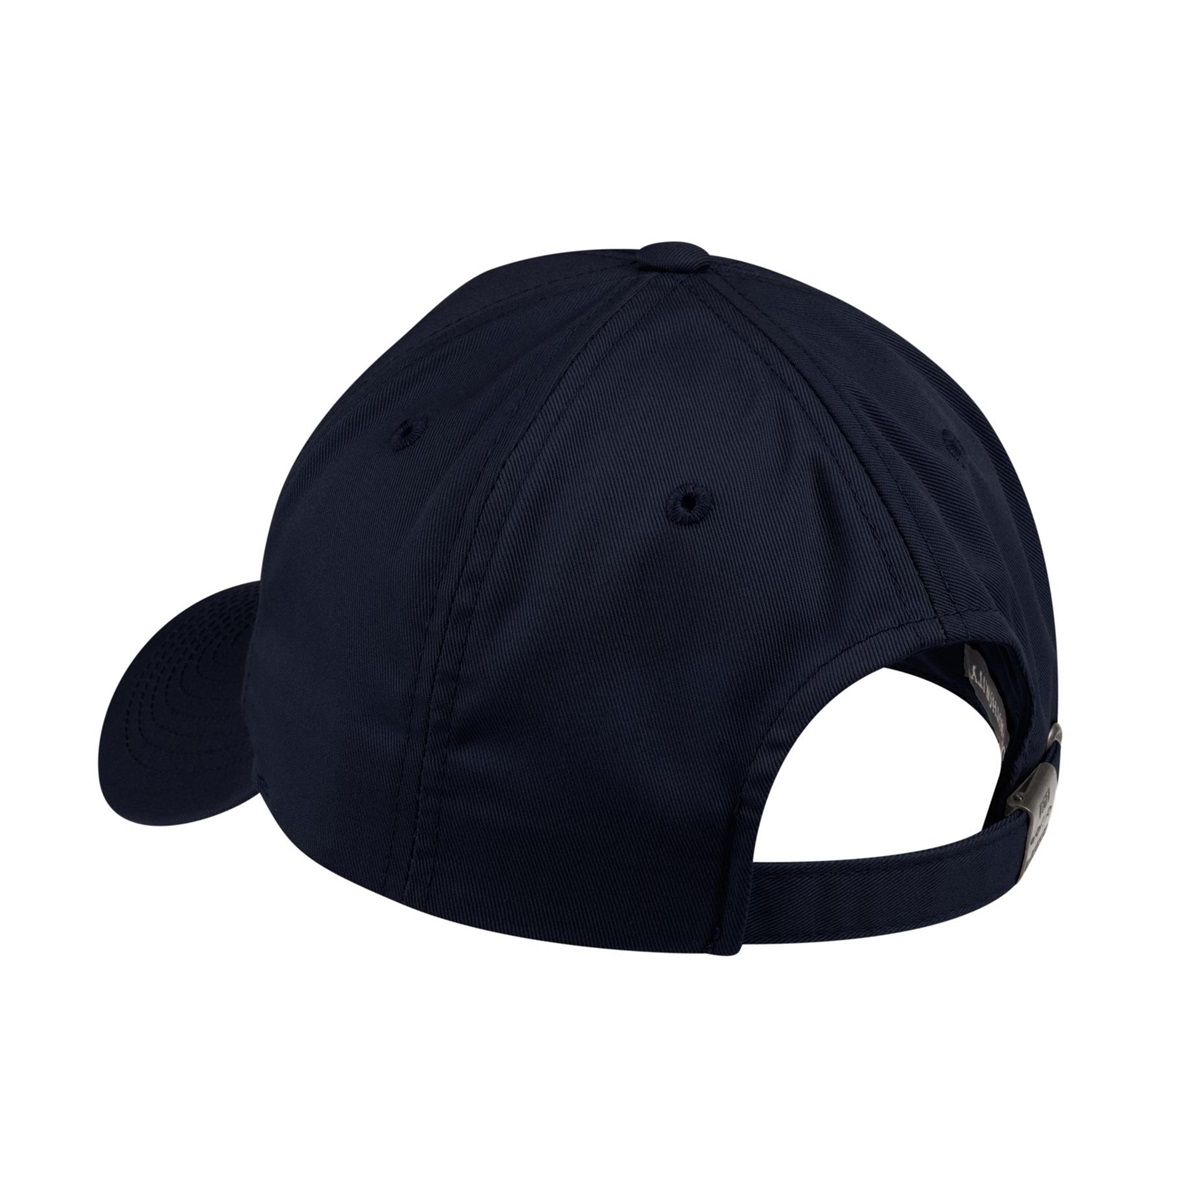 Port Authority C830 Sandwich Bill Cap with Striped Closure - Classic Navy/White